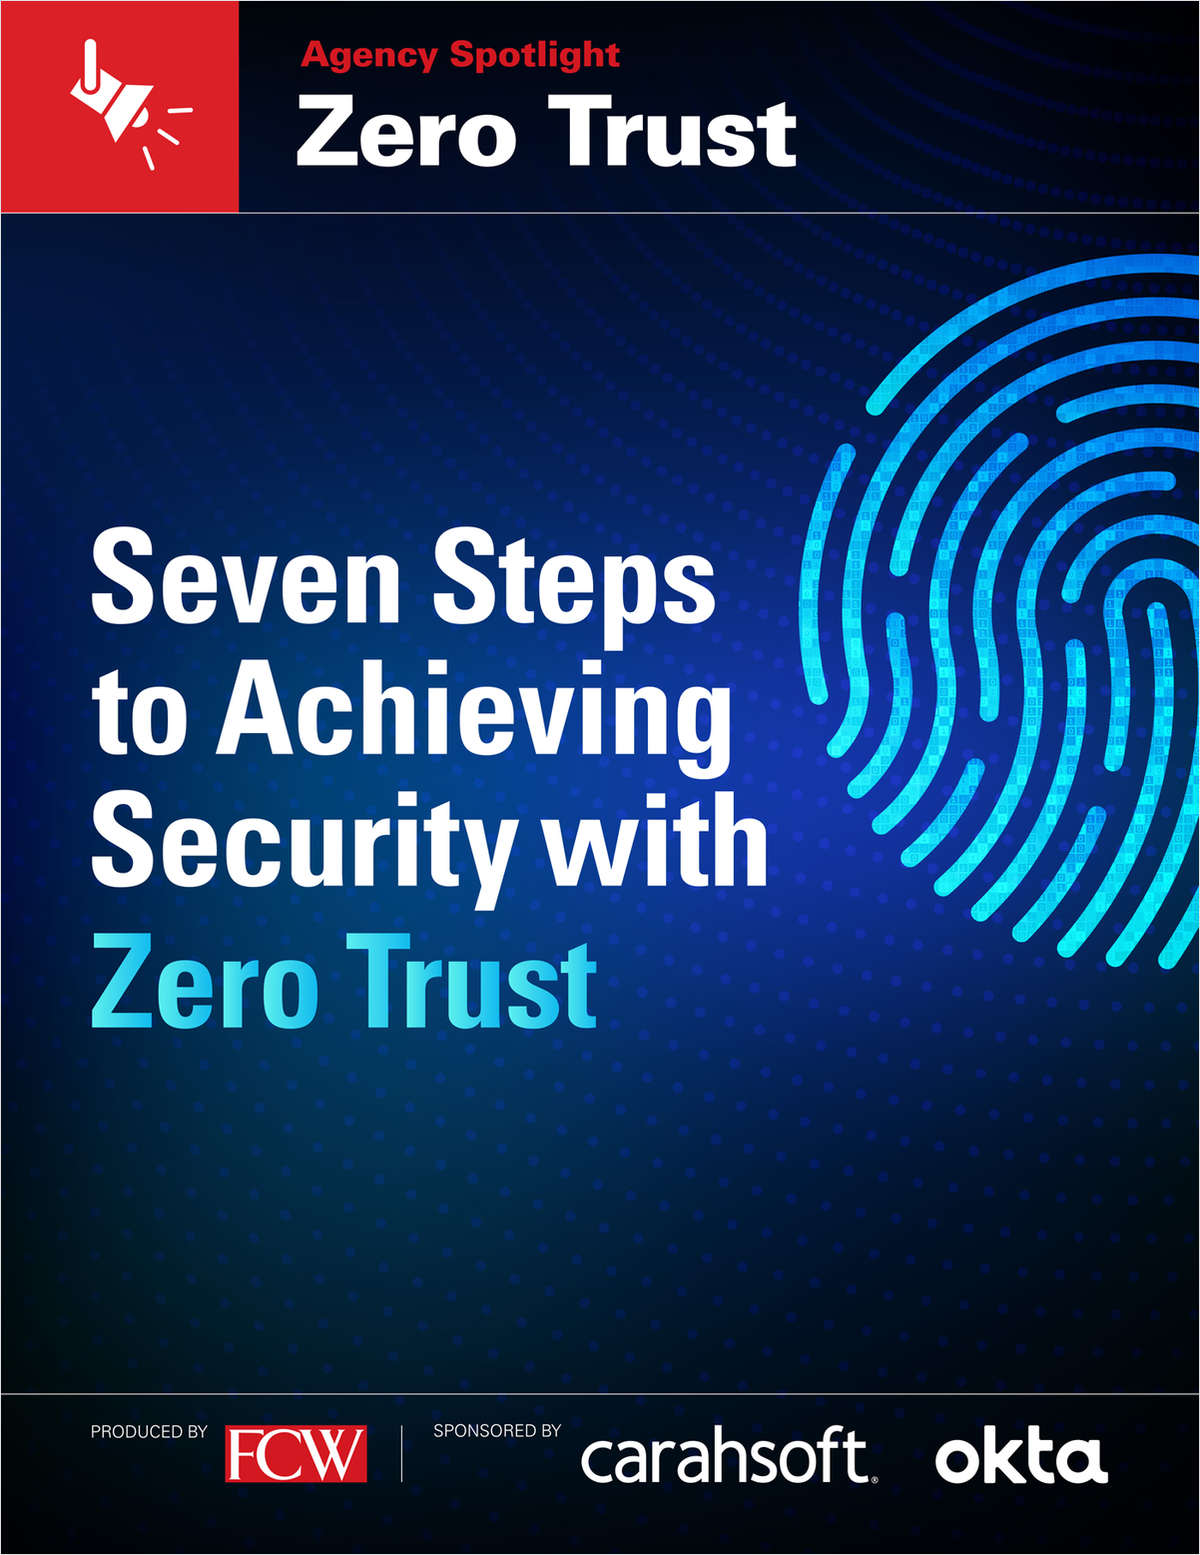 7 Steps to Achieving Security with Zero Trust